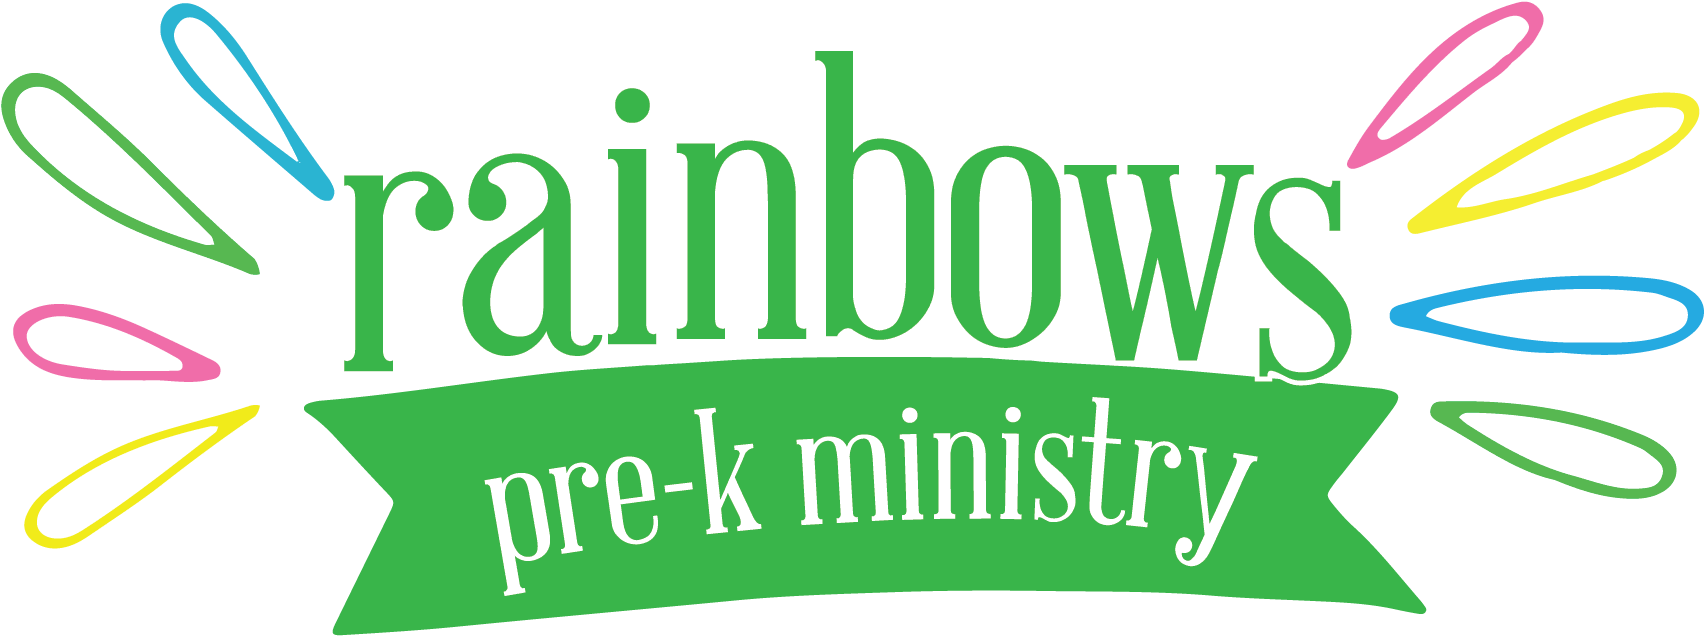 Middle School Ministry Logo Design - Calligraphy (1728x648)